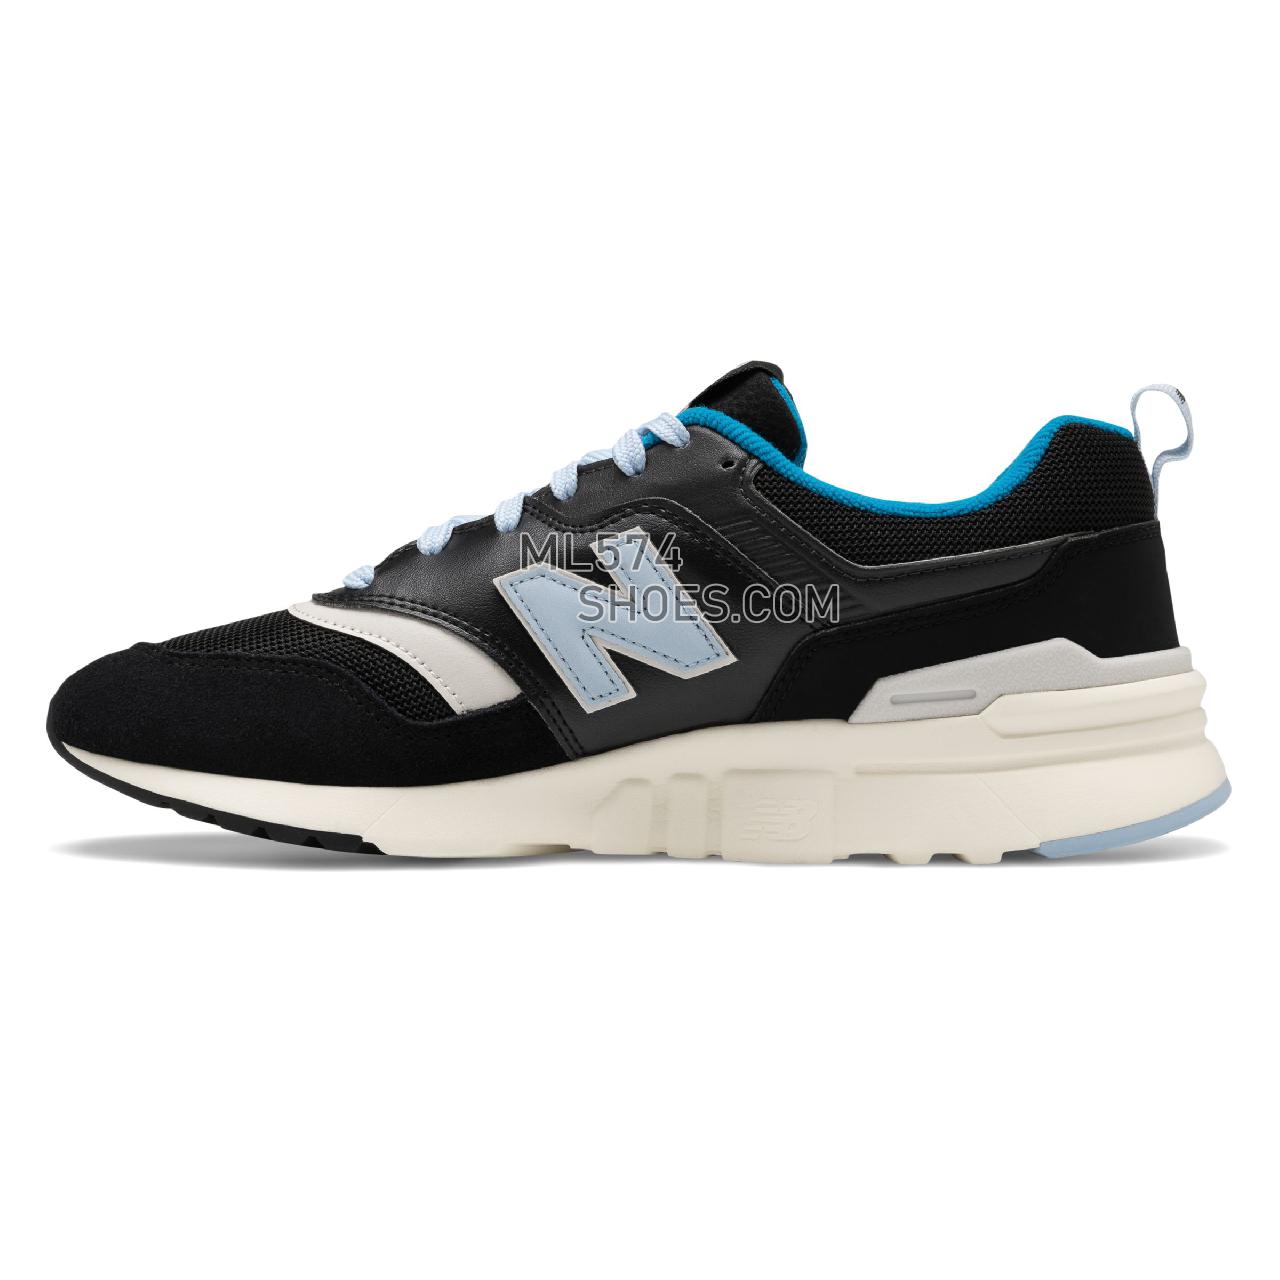 New Balance 997H - Women's Classic Sneakers - Black with Air - CW997HNB